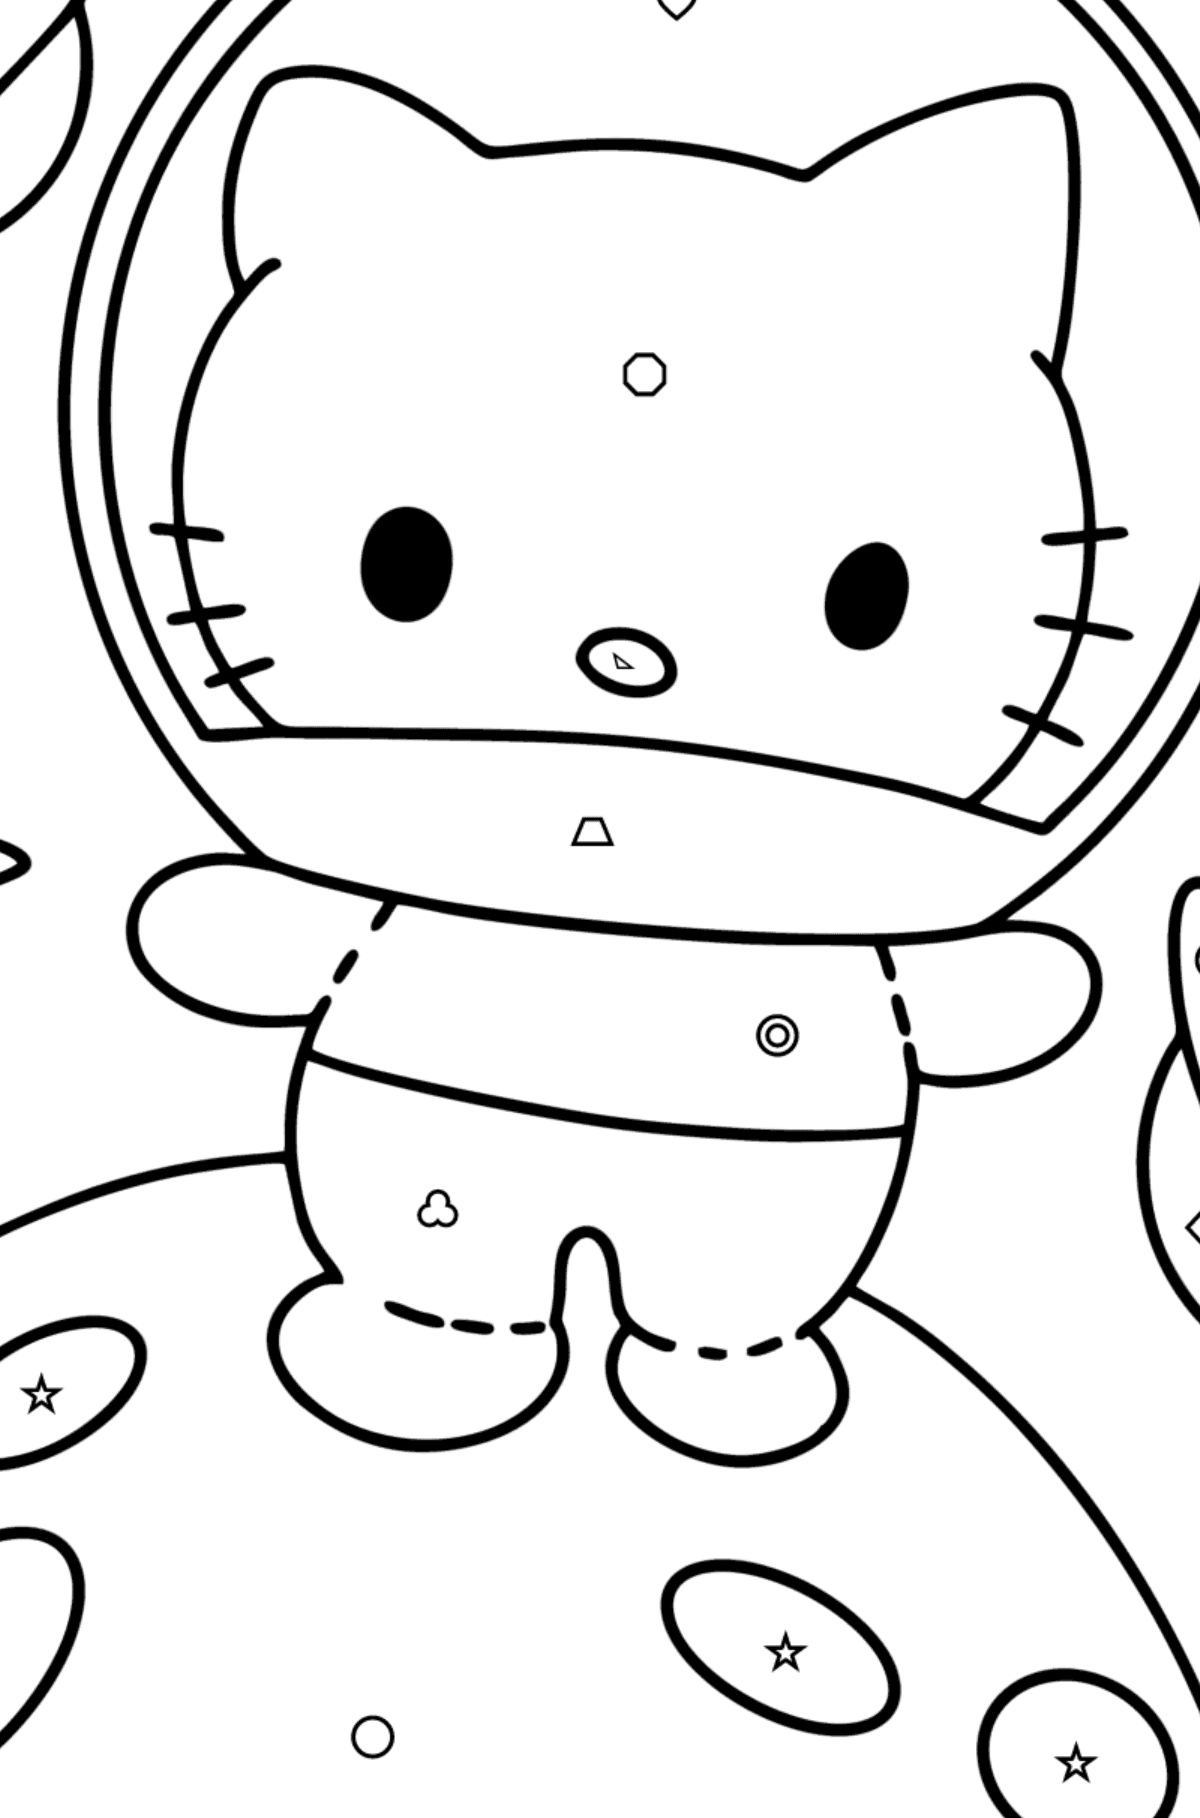 Hello Kitty Astronaut coloring page - Coloring by Geometric Shapes for Kids